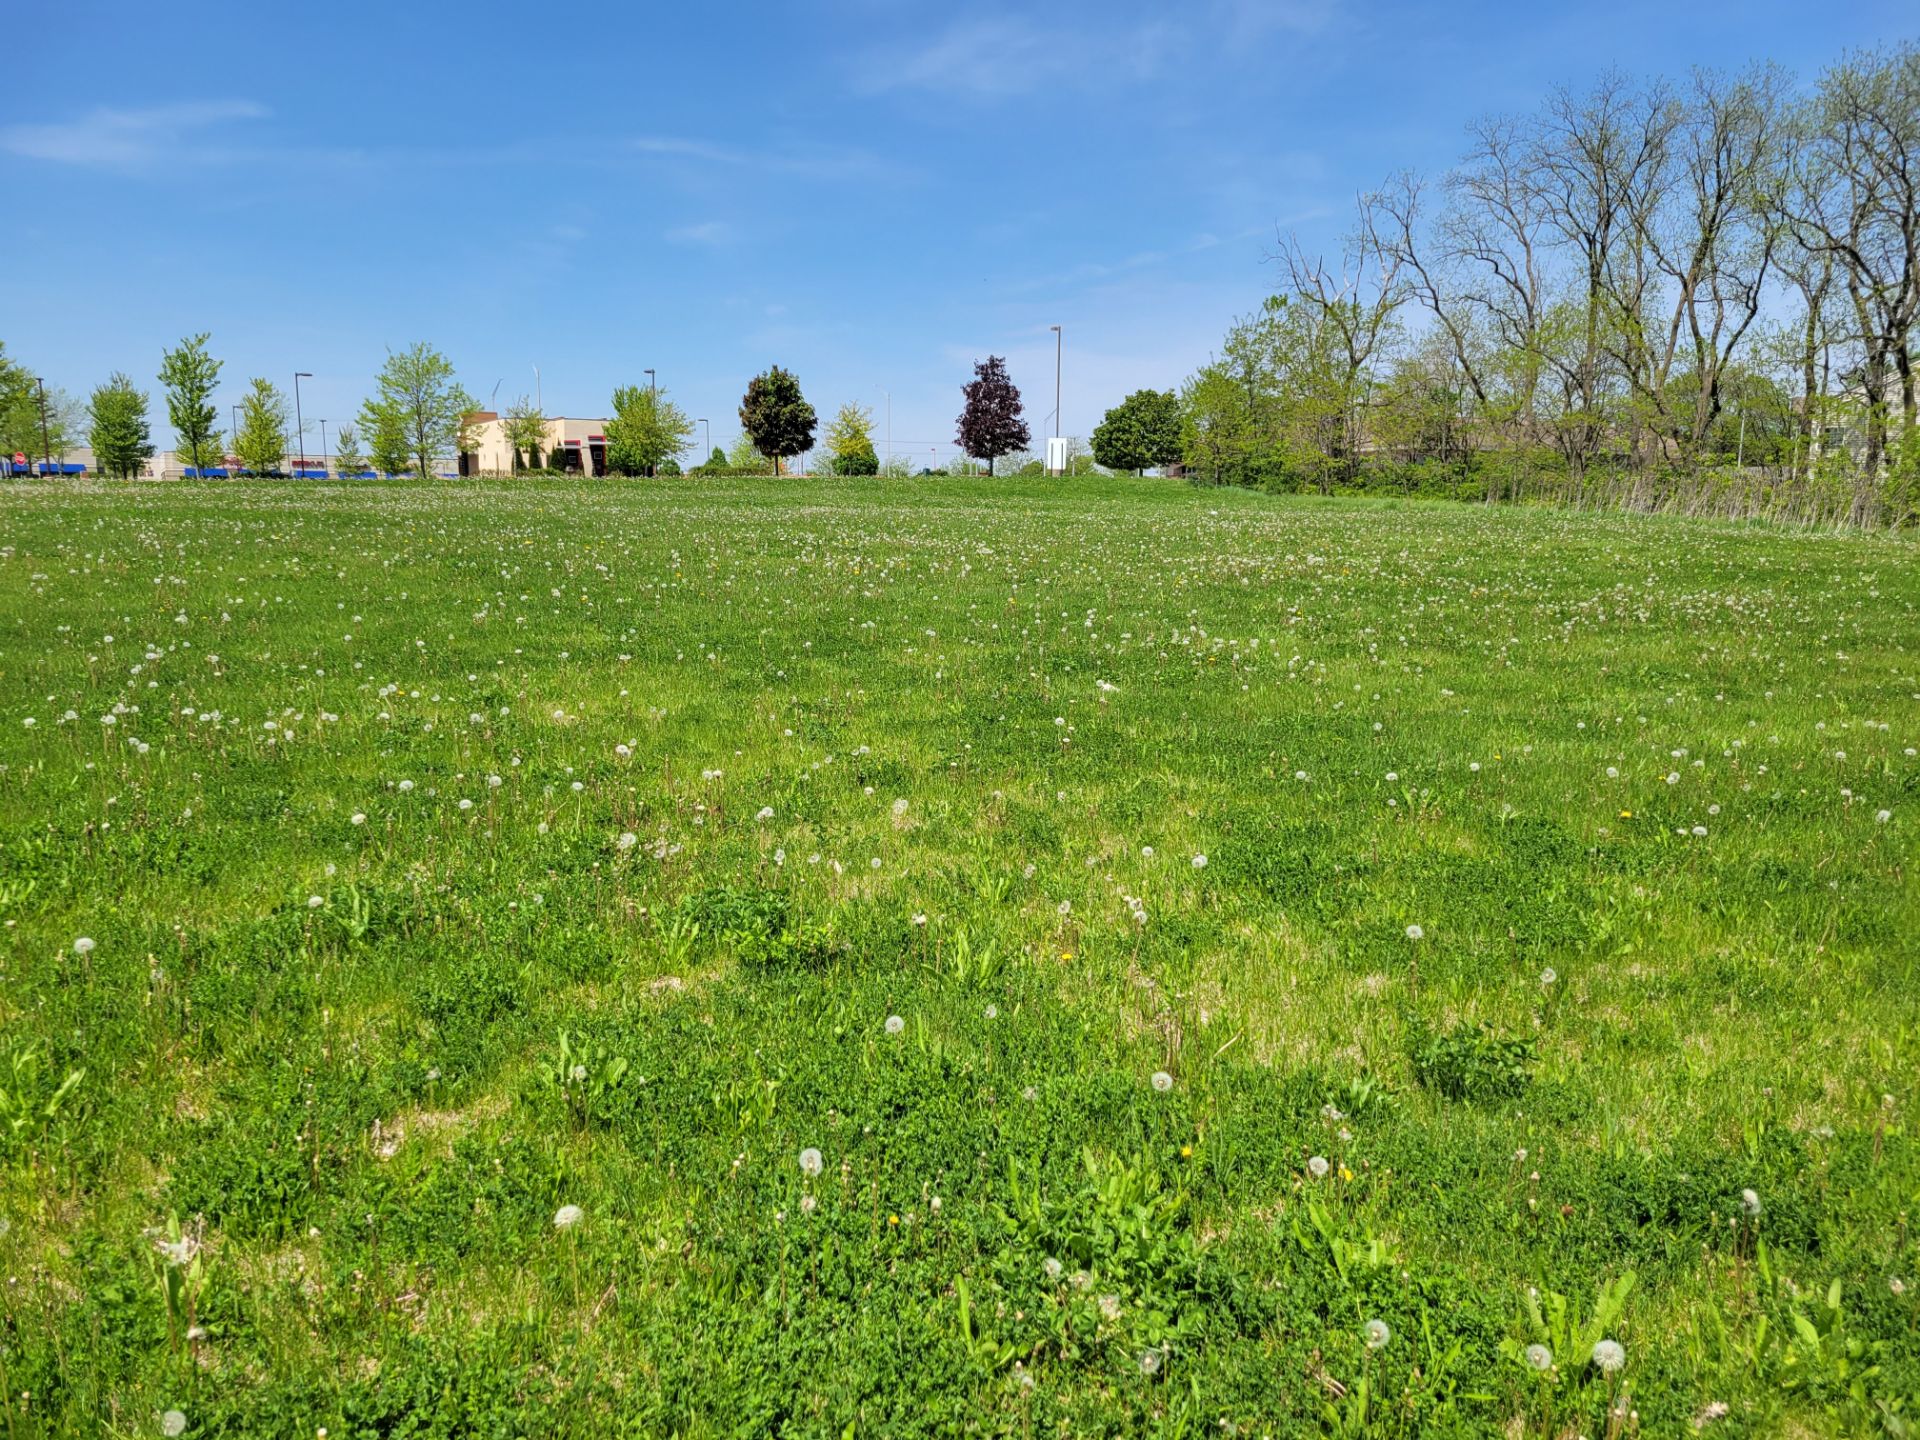 Land Lot 4, Randall and Binnie Rd Carpentersville, Illinois, 2.24 acres - Image 11 of 31